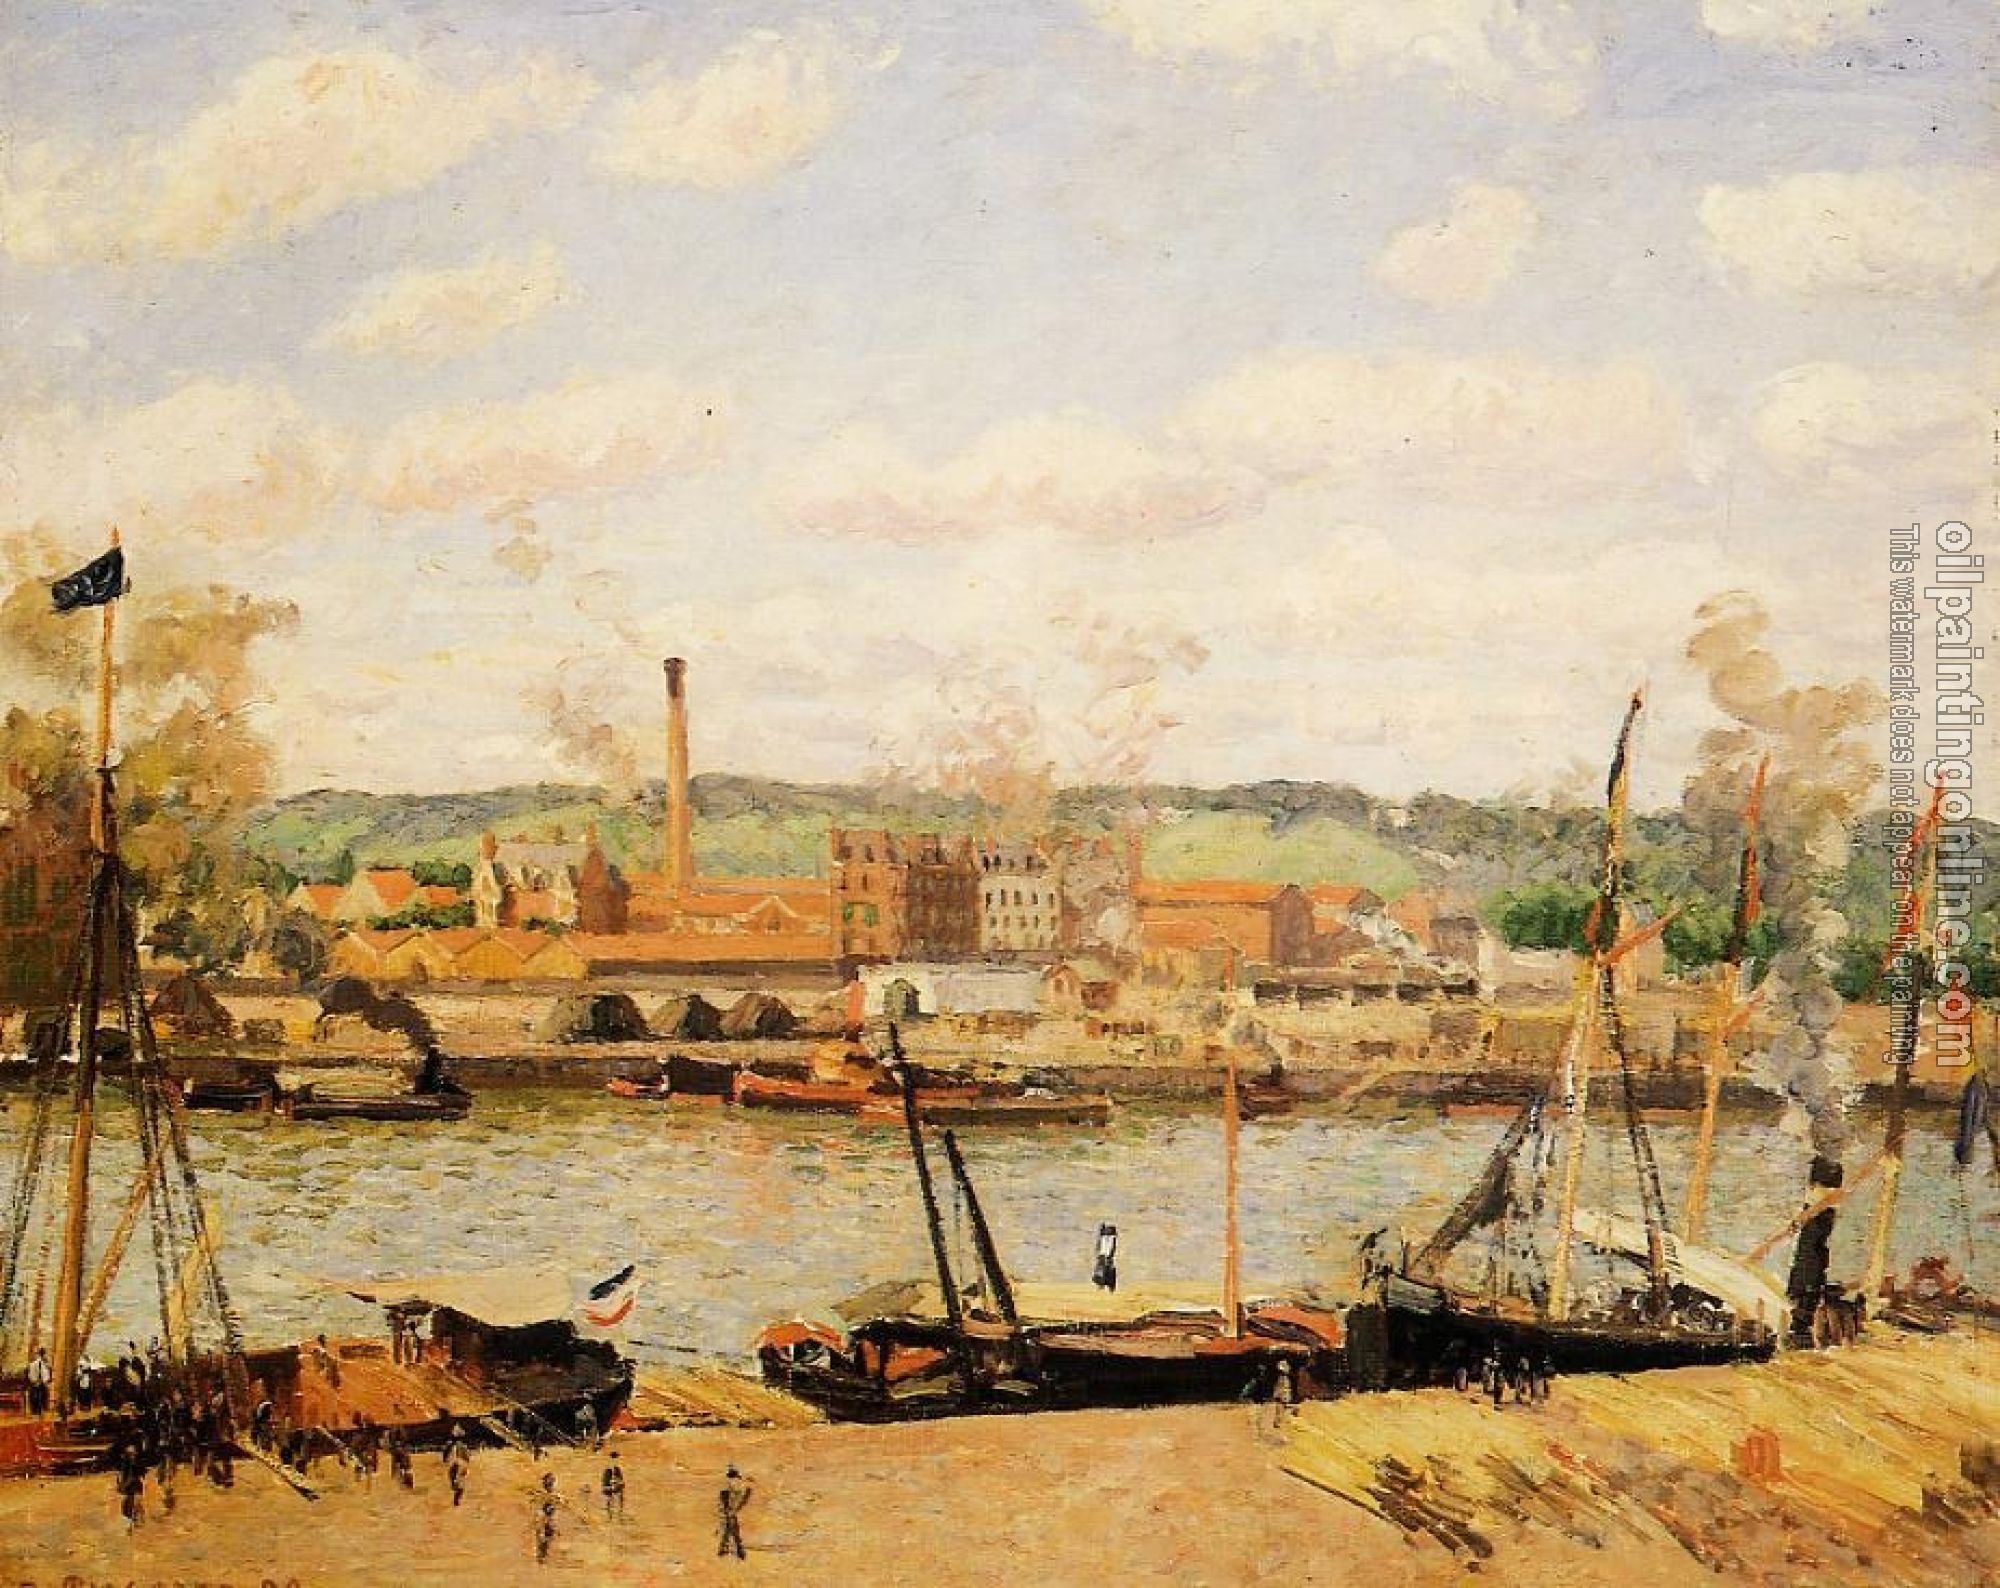 Pissarro, Camille - View of the Cotton Mill at Oissel, near Rouen